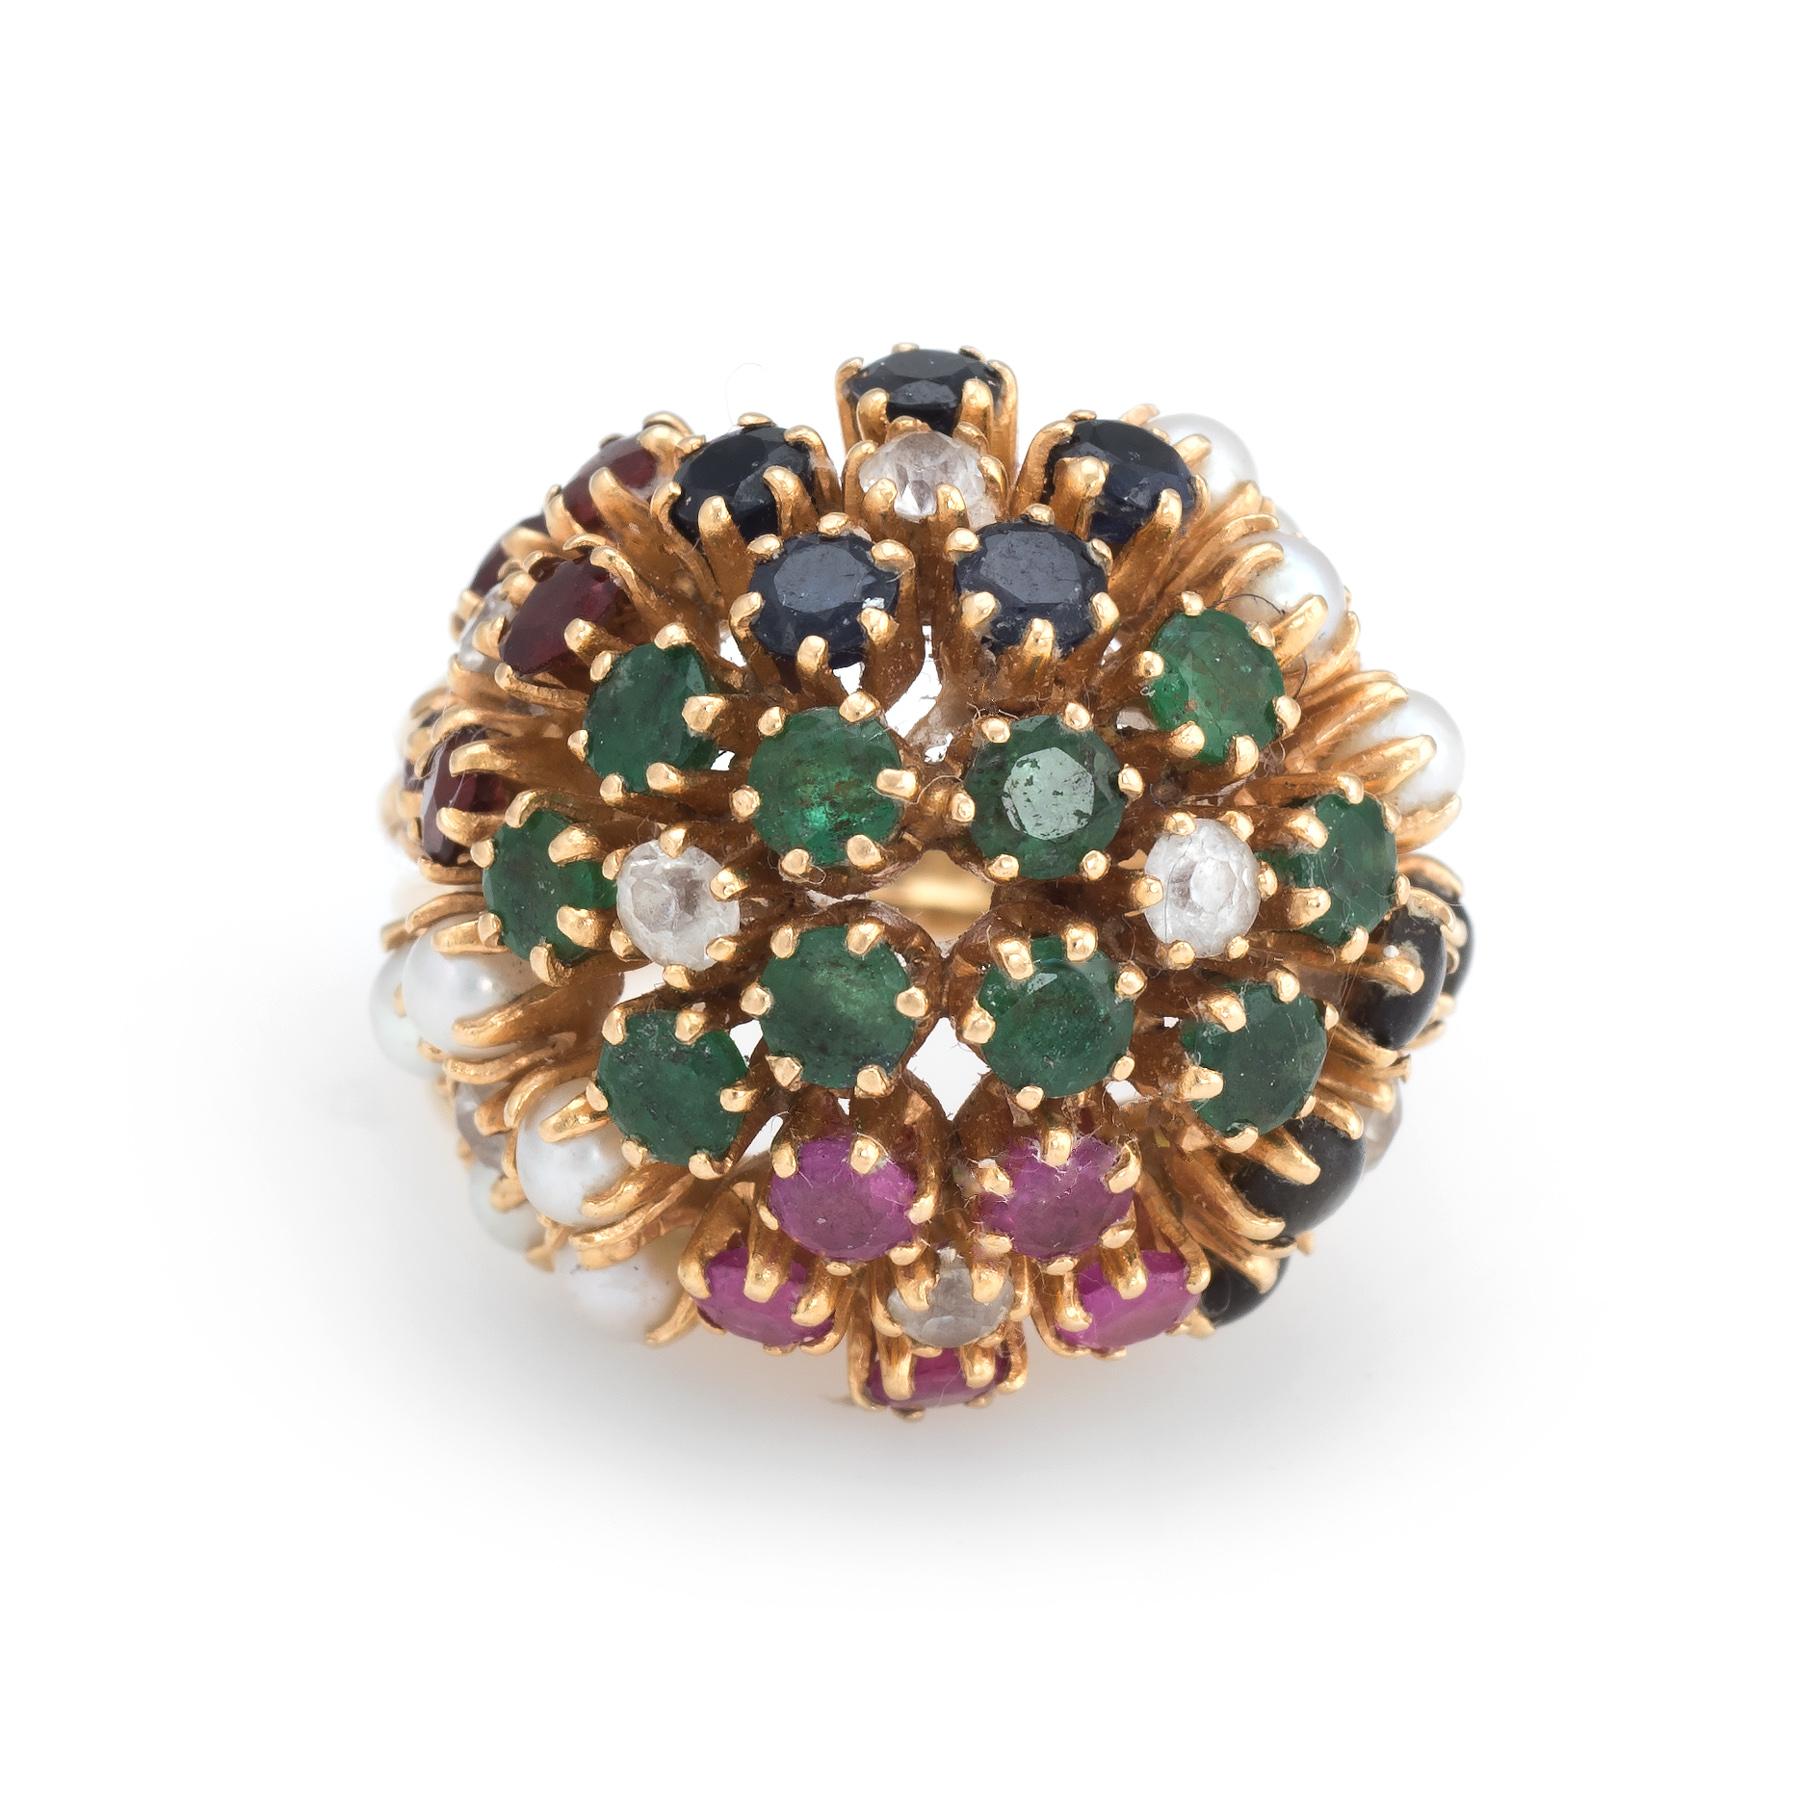 Finely detailed vintage domed cocktail ring (circa 1960s to 1970s), crafted in 18 karat yellow gold. 

Rubies, emeralds & sapphires measure 2mm each (estimated at 0.05 carats each). Seed pearls each measure 2mm and synthetic white stones measure